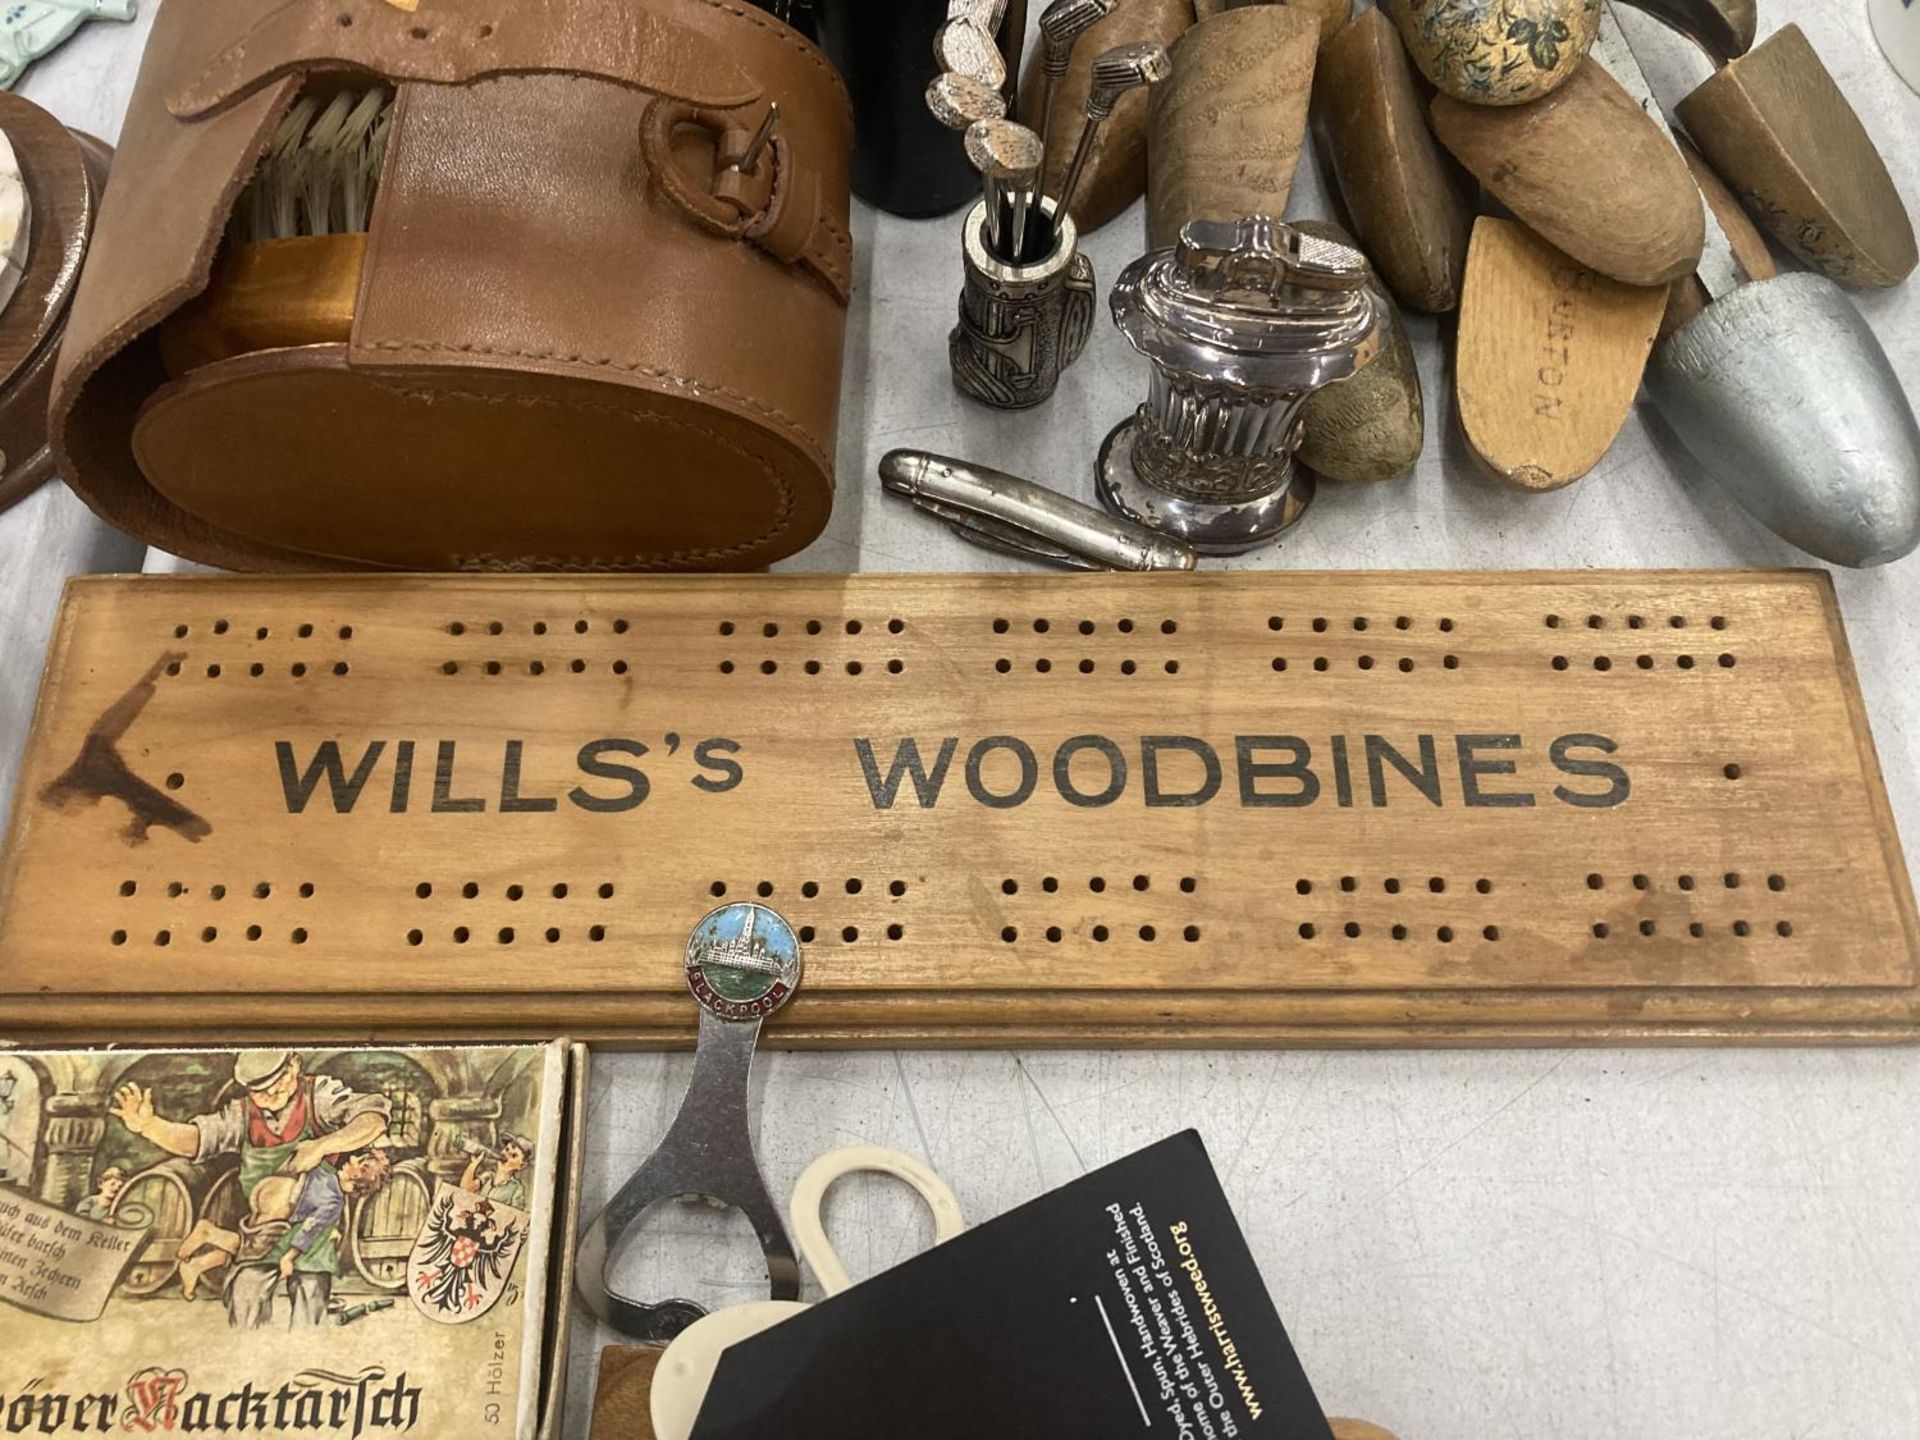 A MIXED VINTAGE LOT TO INCLUDE SHOE STRETCHERS, HIP FLASKS, A 'WOODBINES' CRIBBAGE BOARD, LETTER - Image 5 of 7